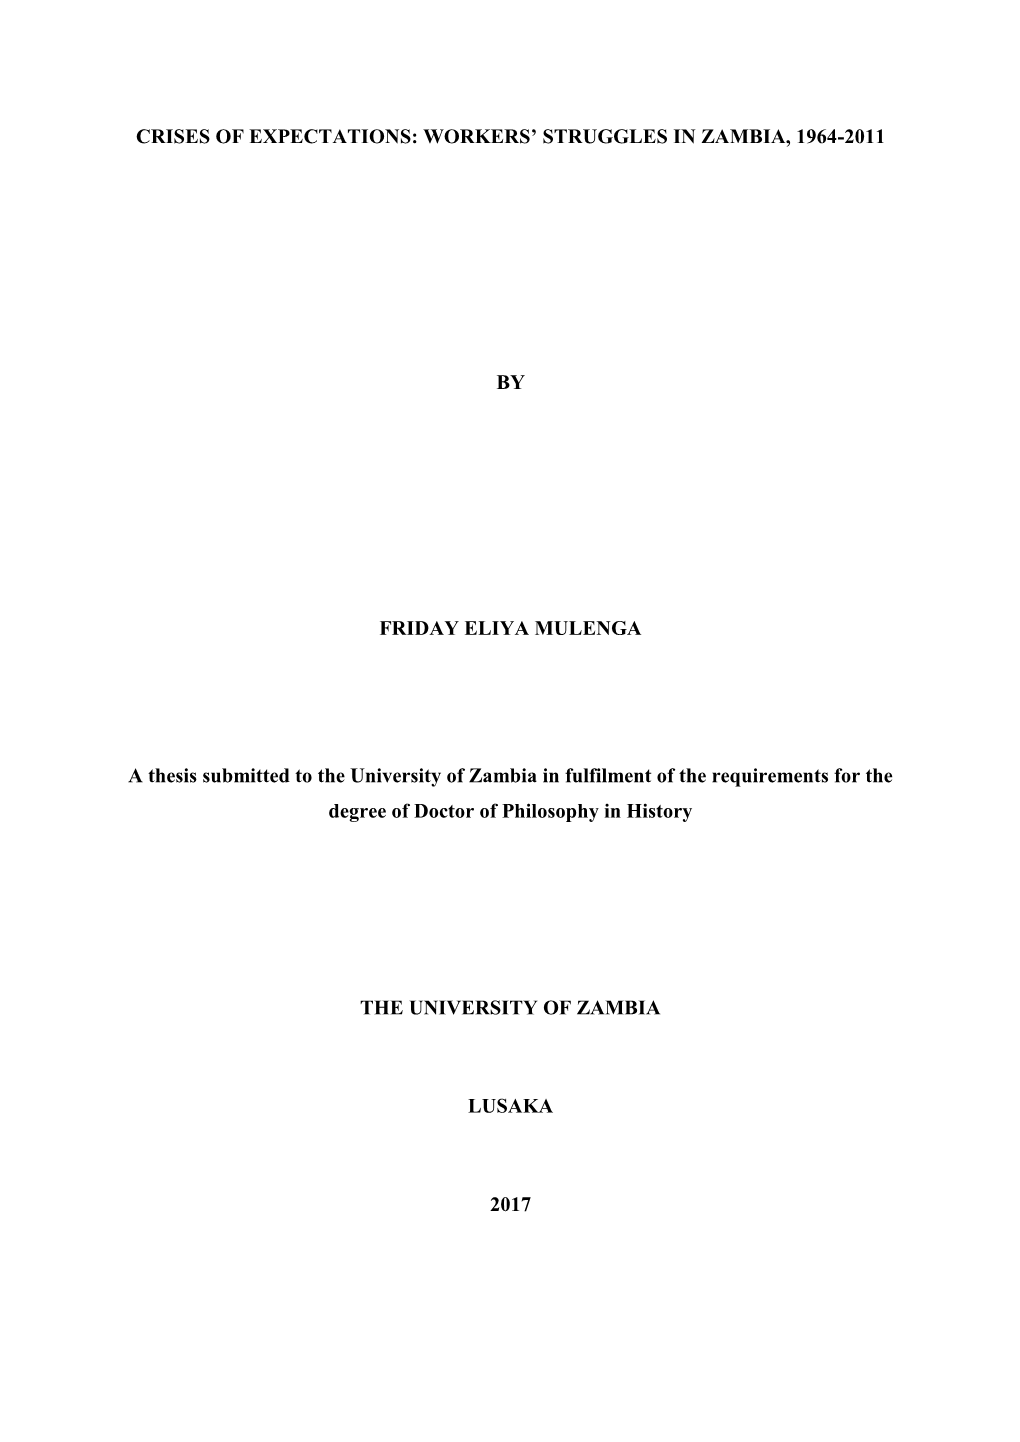 CRISES of EXPECTATIONS: WORKERS' STRUGGLES in ZAMBIA, 1964-2011 by FRIDAY ELIYA MULENGA a Thesis Submitted to the University O